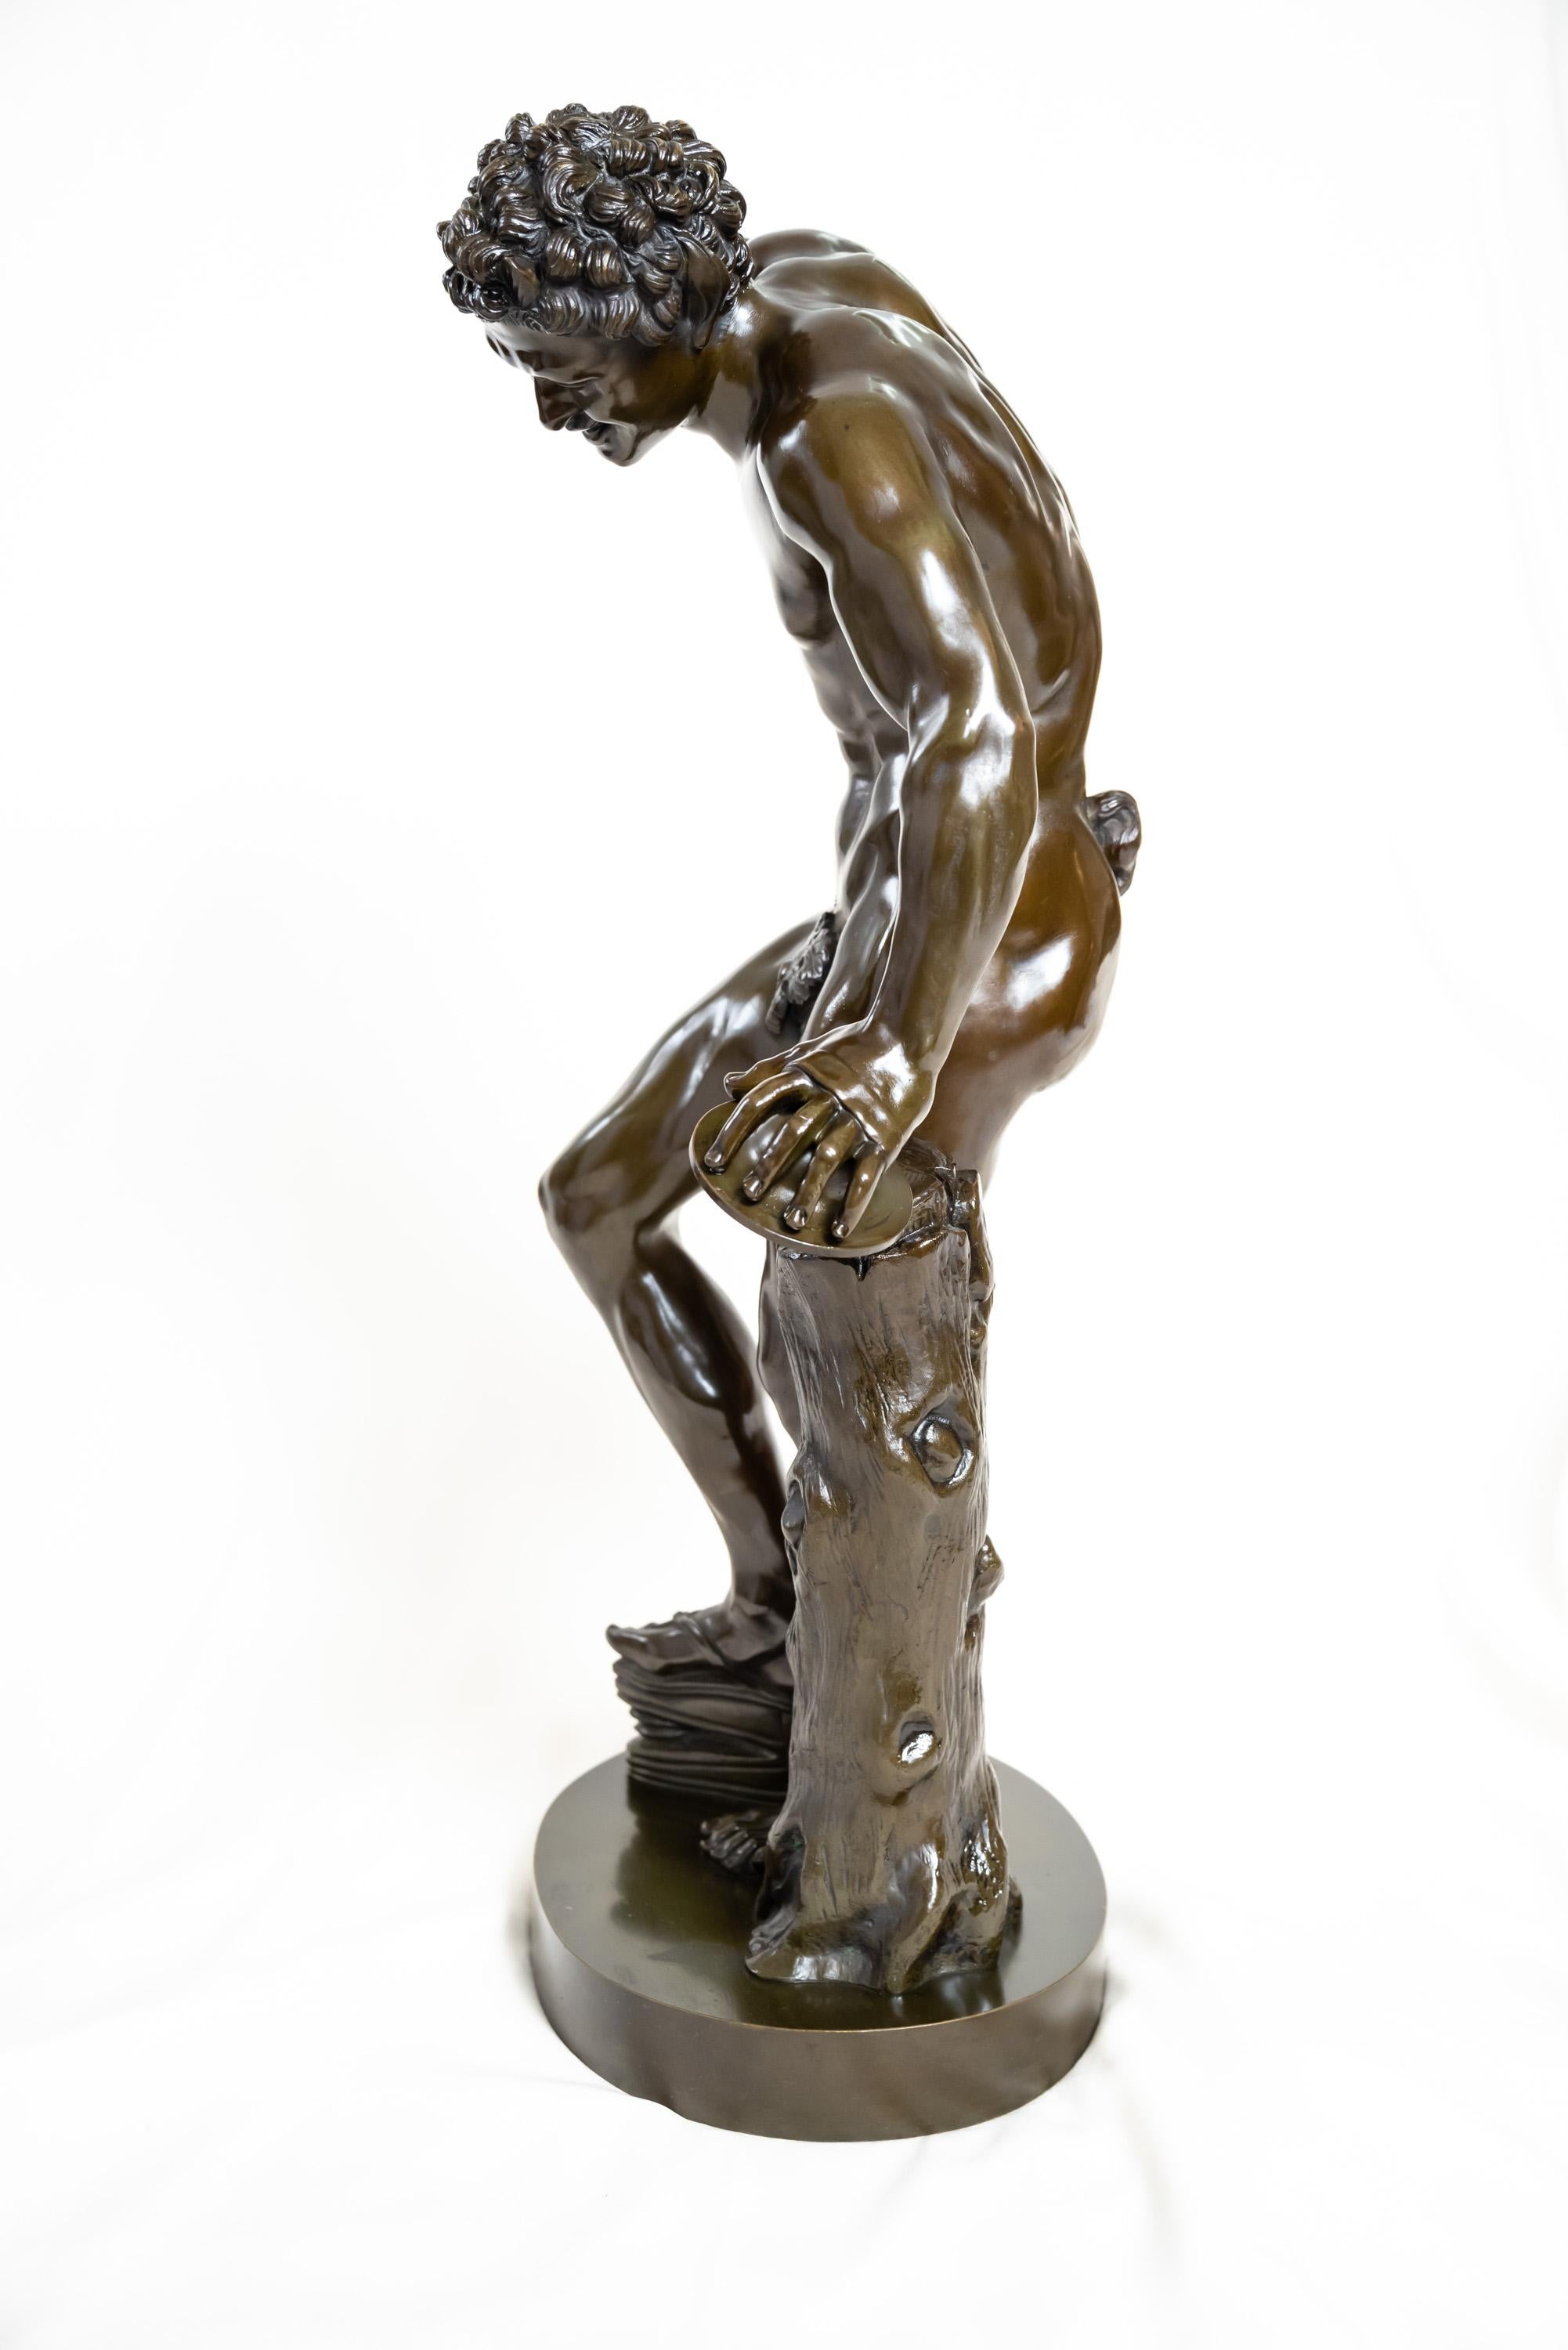 A bronze figure of The Dancing Faun with Cymbals, dark brown patination. It is made after the model by Massimiliano Soldani (Italian, 1656-1740), on oval base, signed Duchemin, after Isaac Duchemin.